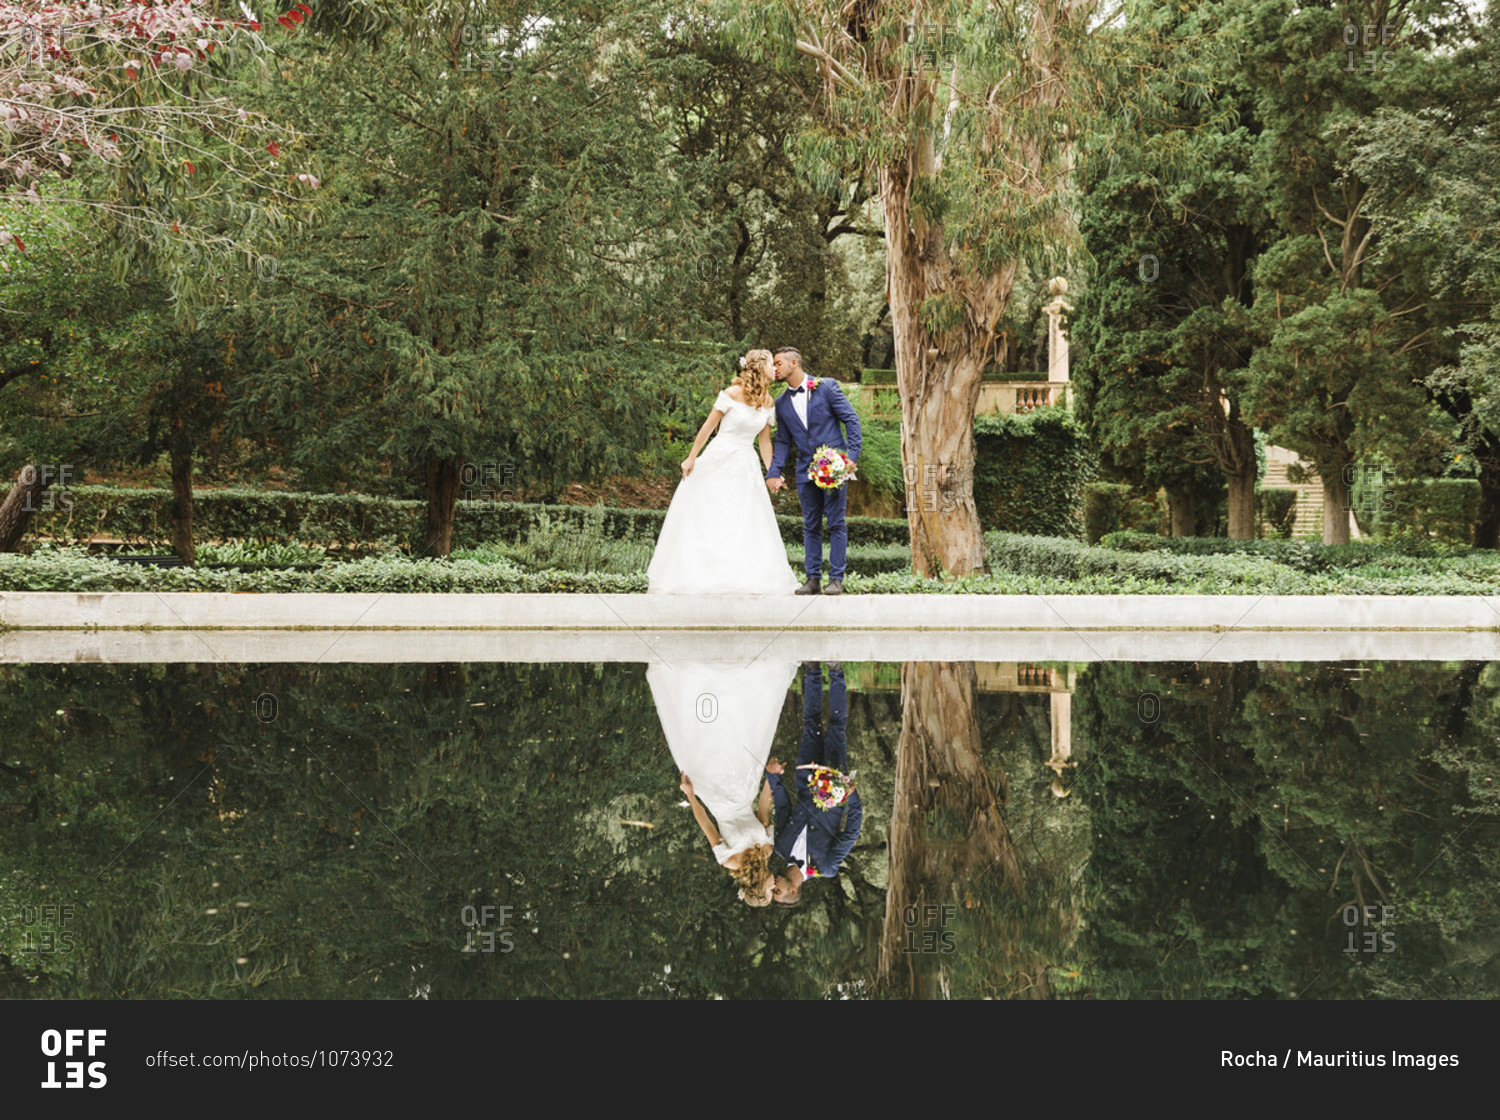 Wedding, newlyweds, young adults, diversity, love, park, reflection